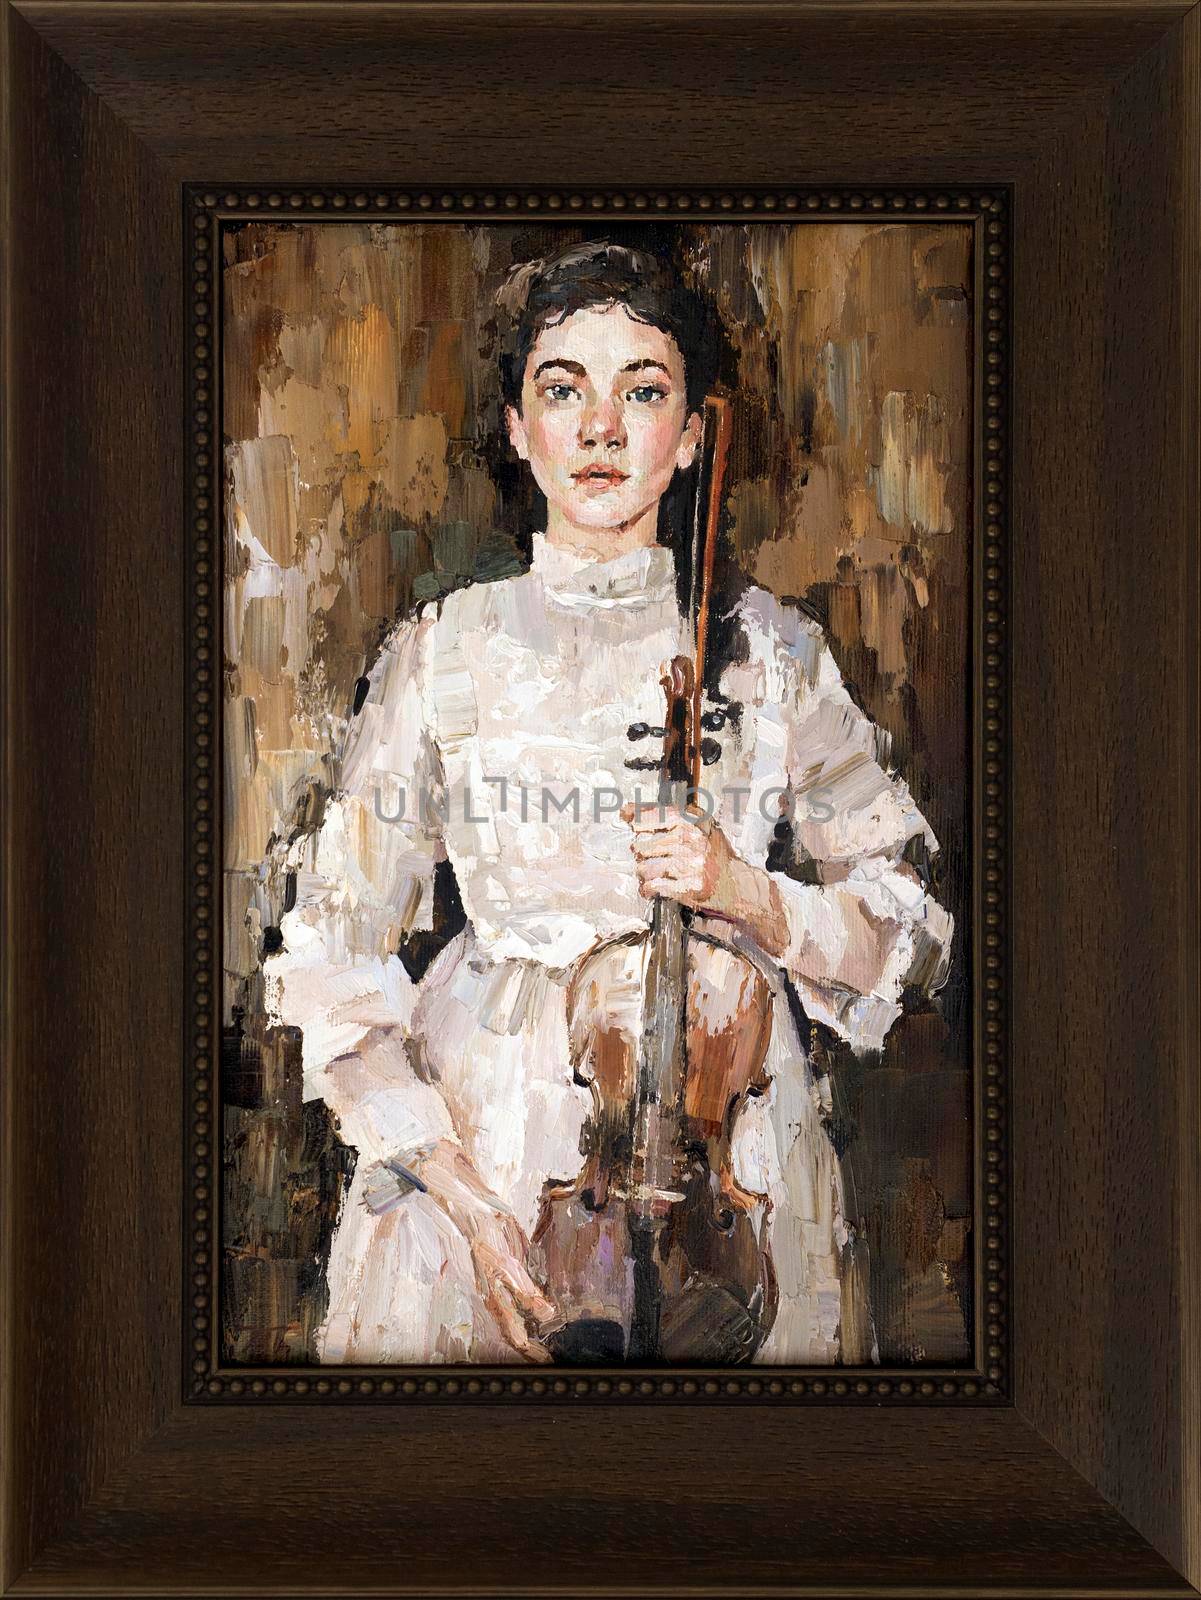 Framed girl in a white dress holding a violin in her hands. by jannojan